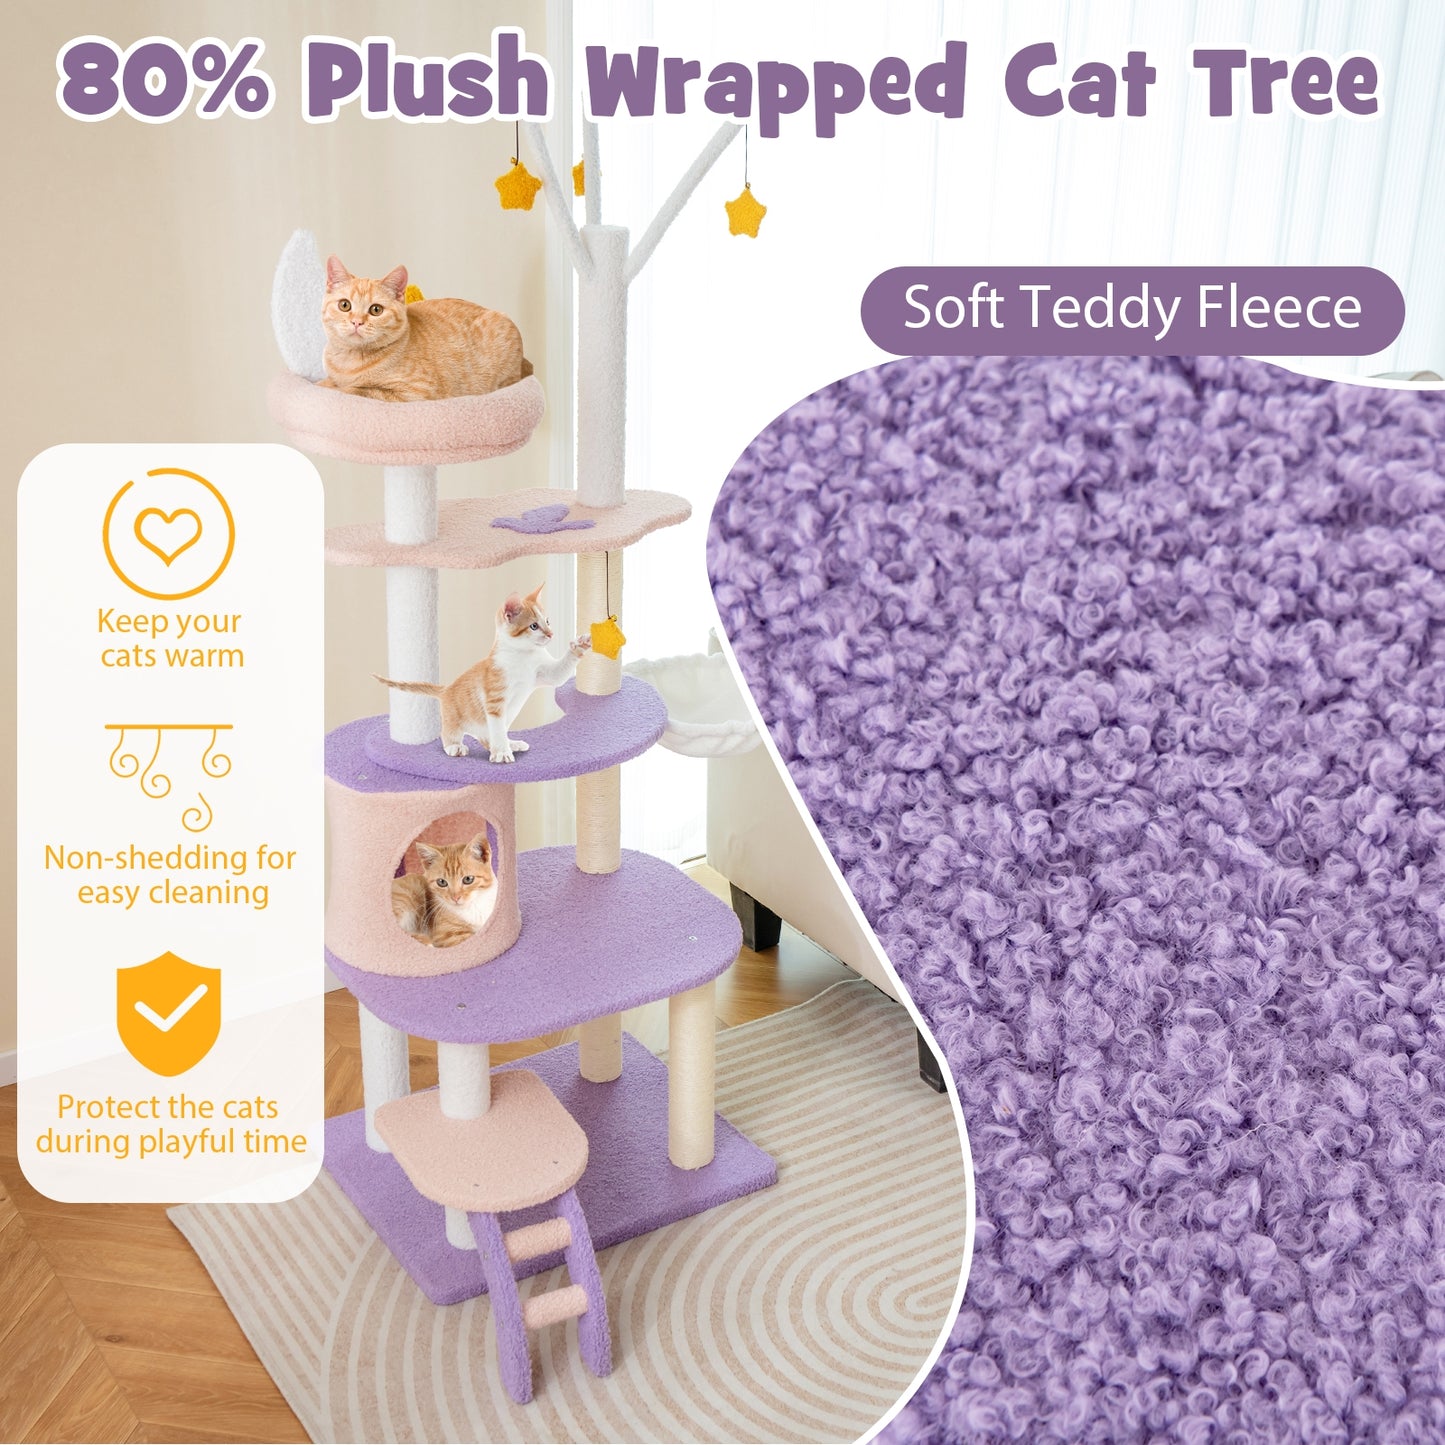 Multi-level Cat Tower with Sisal Covered Scratching Posts-M